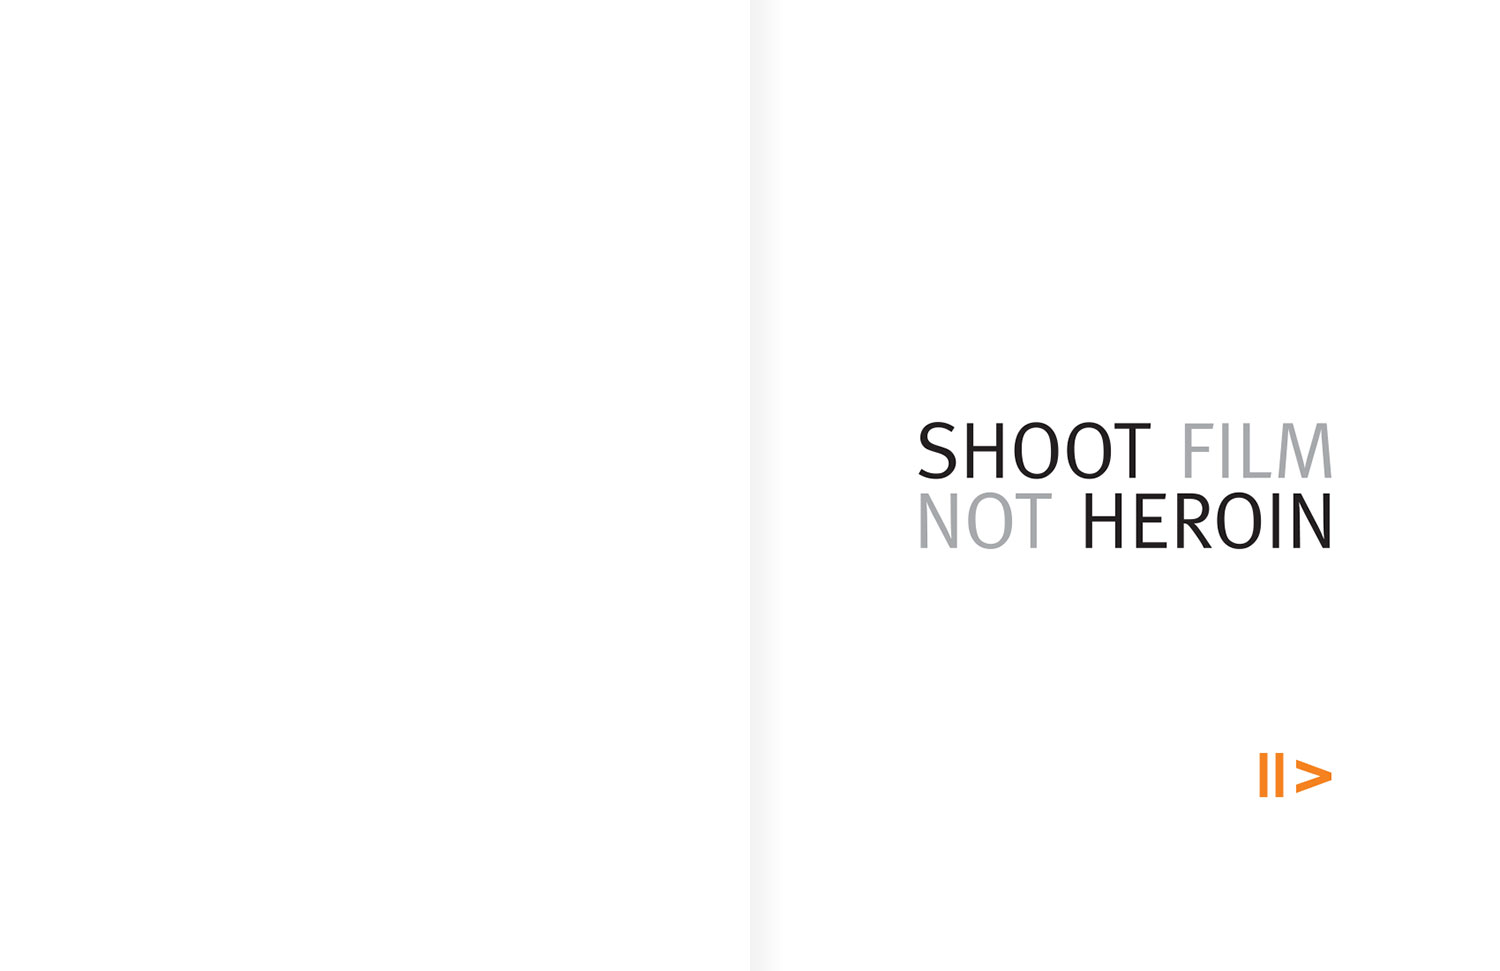 Shoot Film Not Heroin - Pitch book front cover